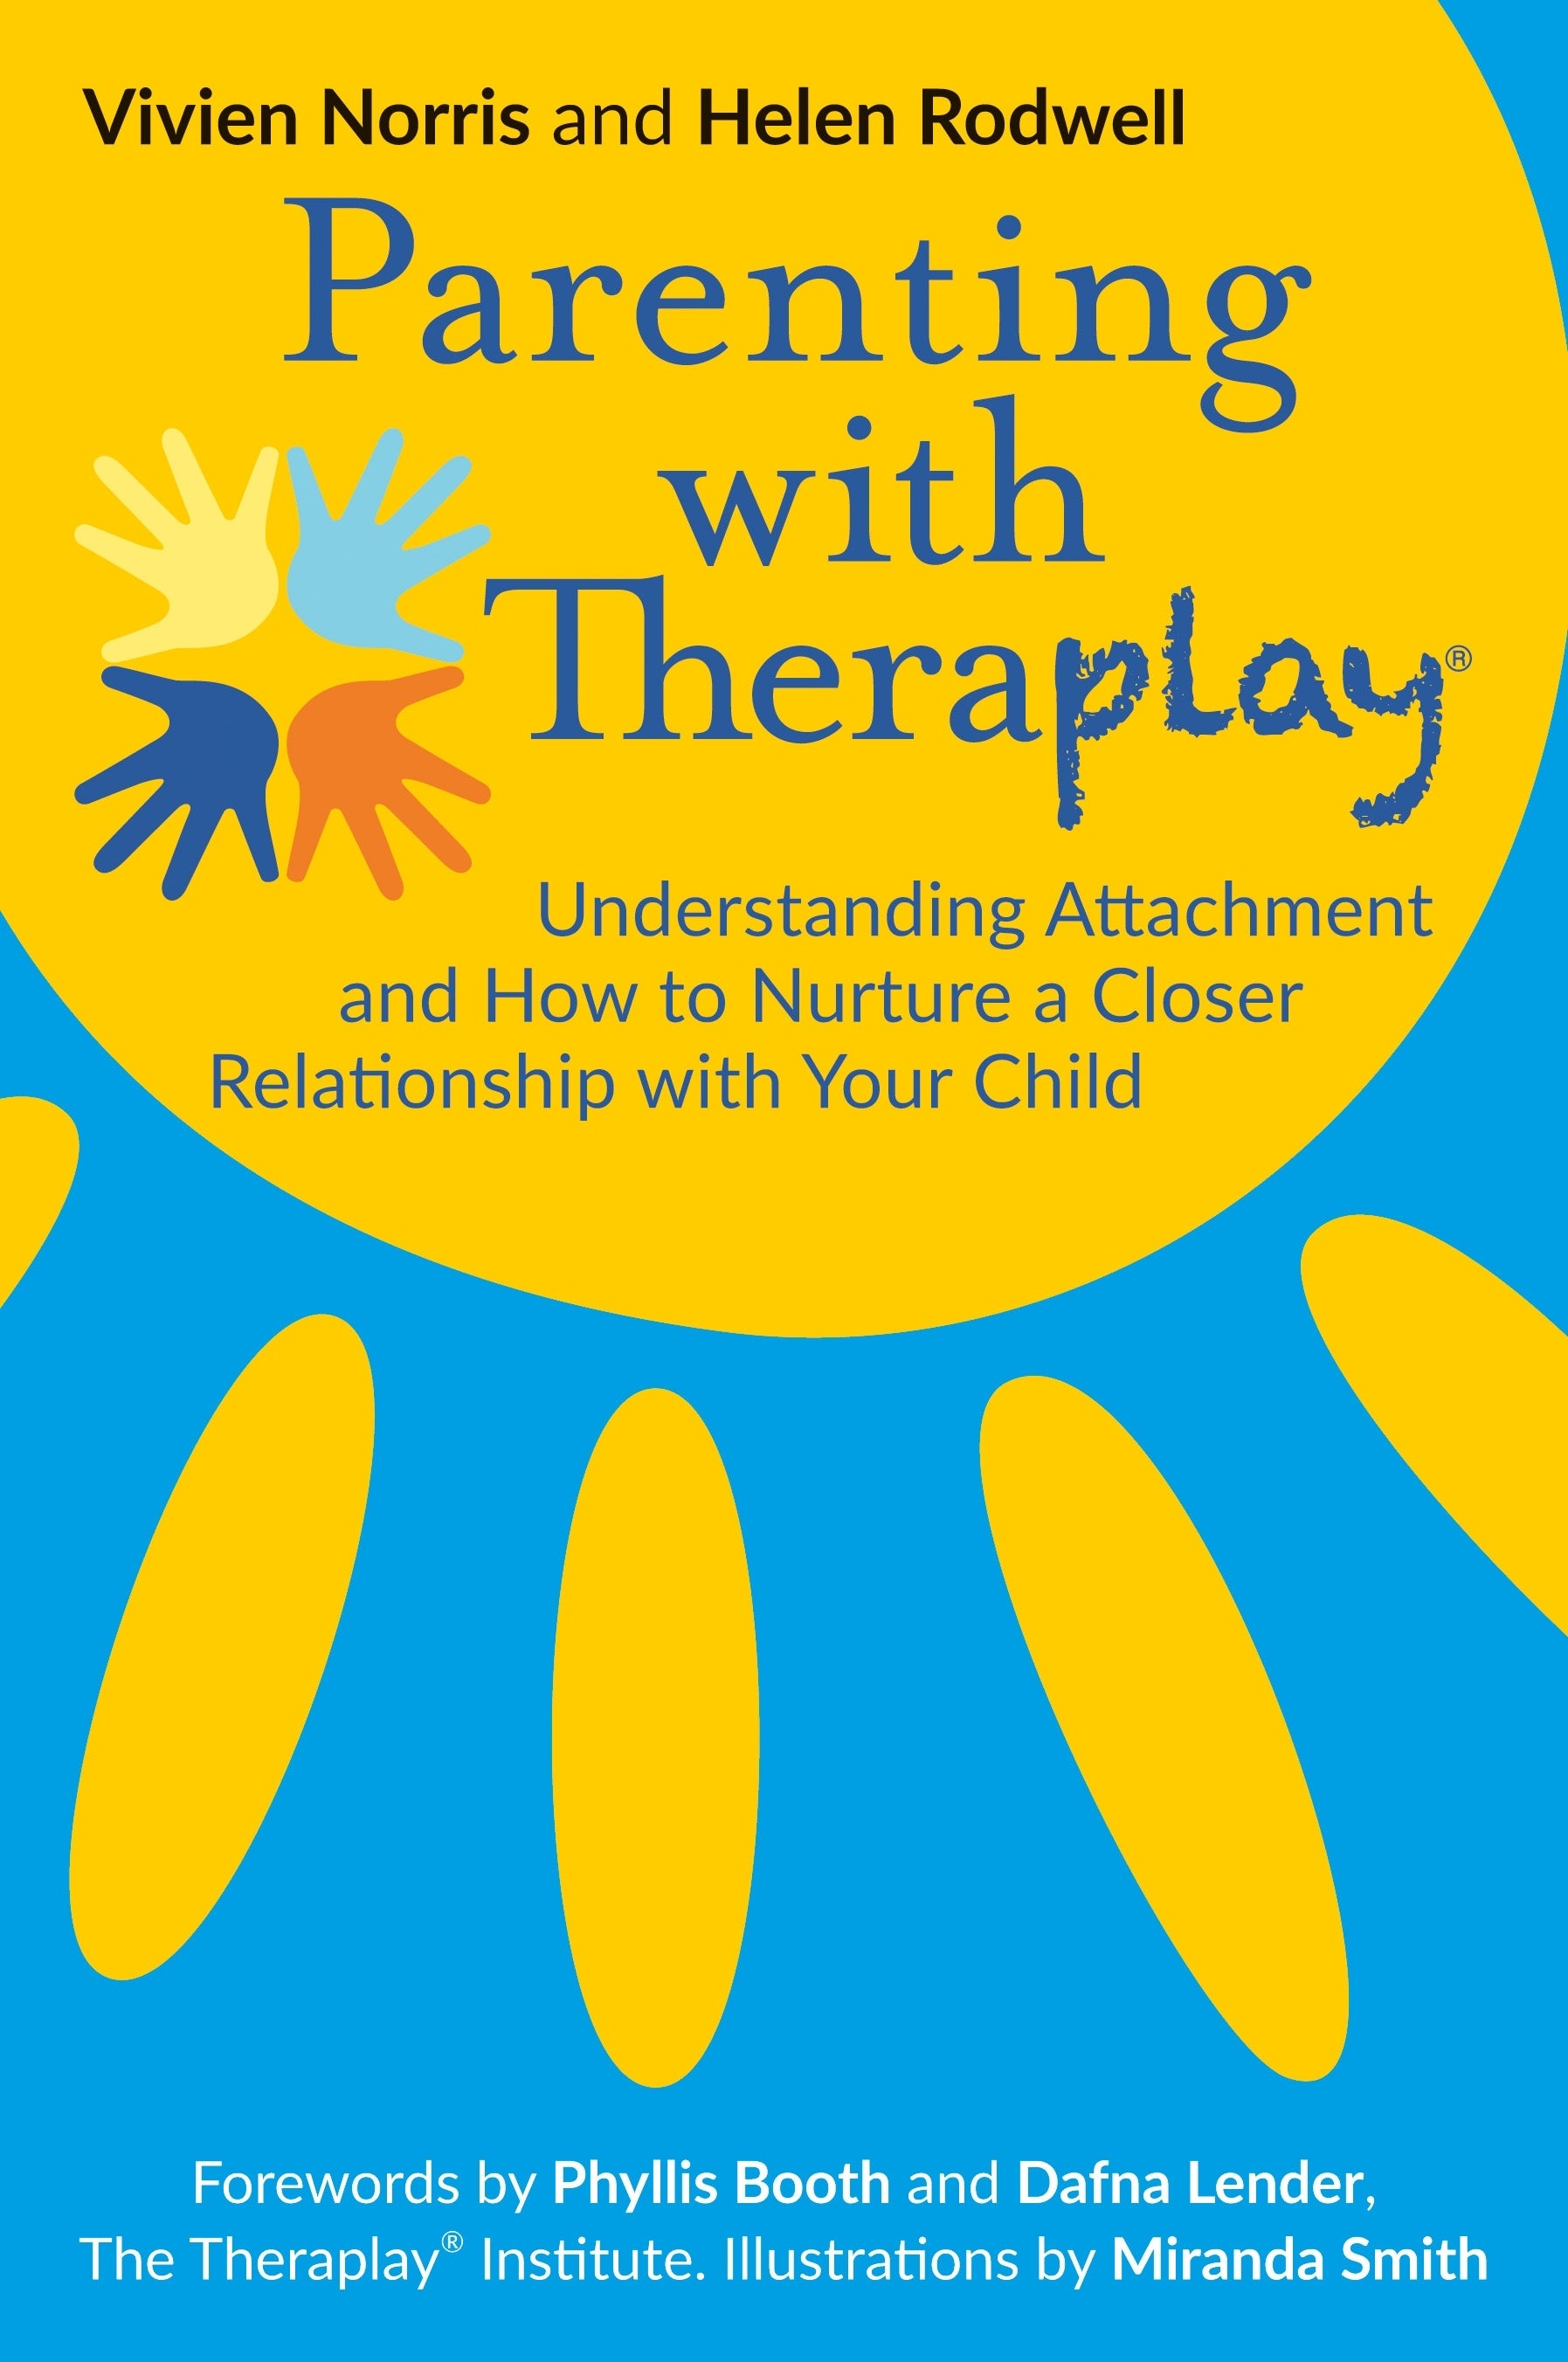 Parenting with Theraplay® by Helen Rodwell, Vivien Norris, Phyllis Booth, Dafna Lender, Miranda Smith